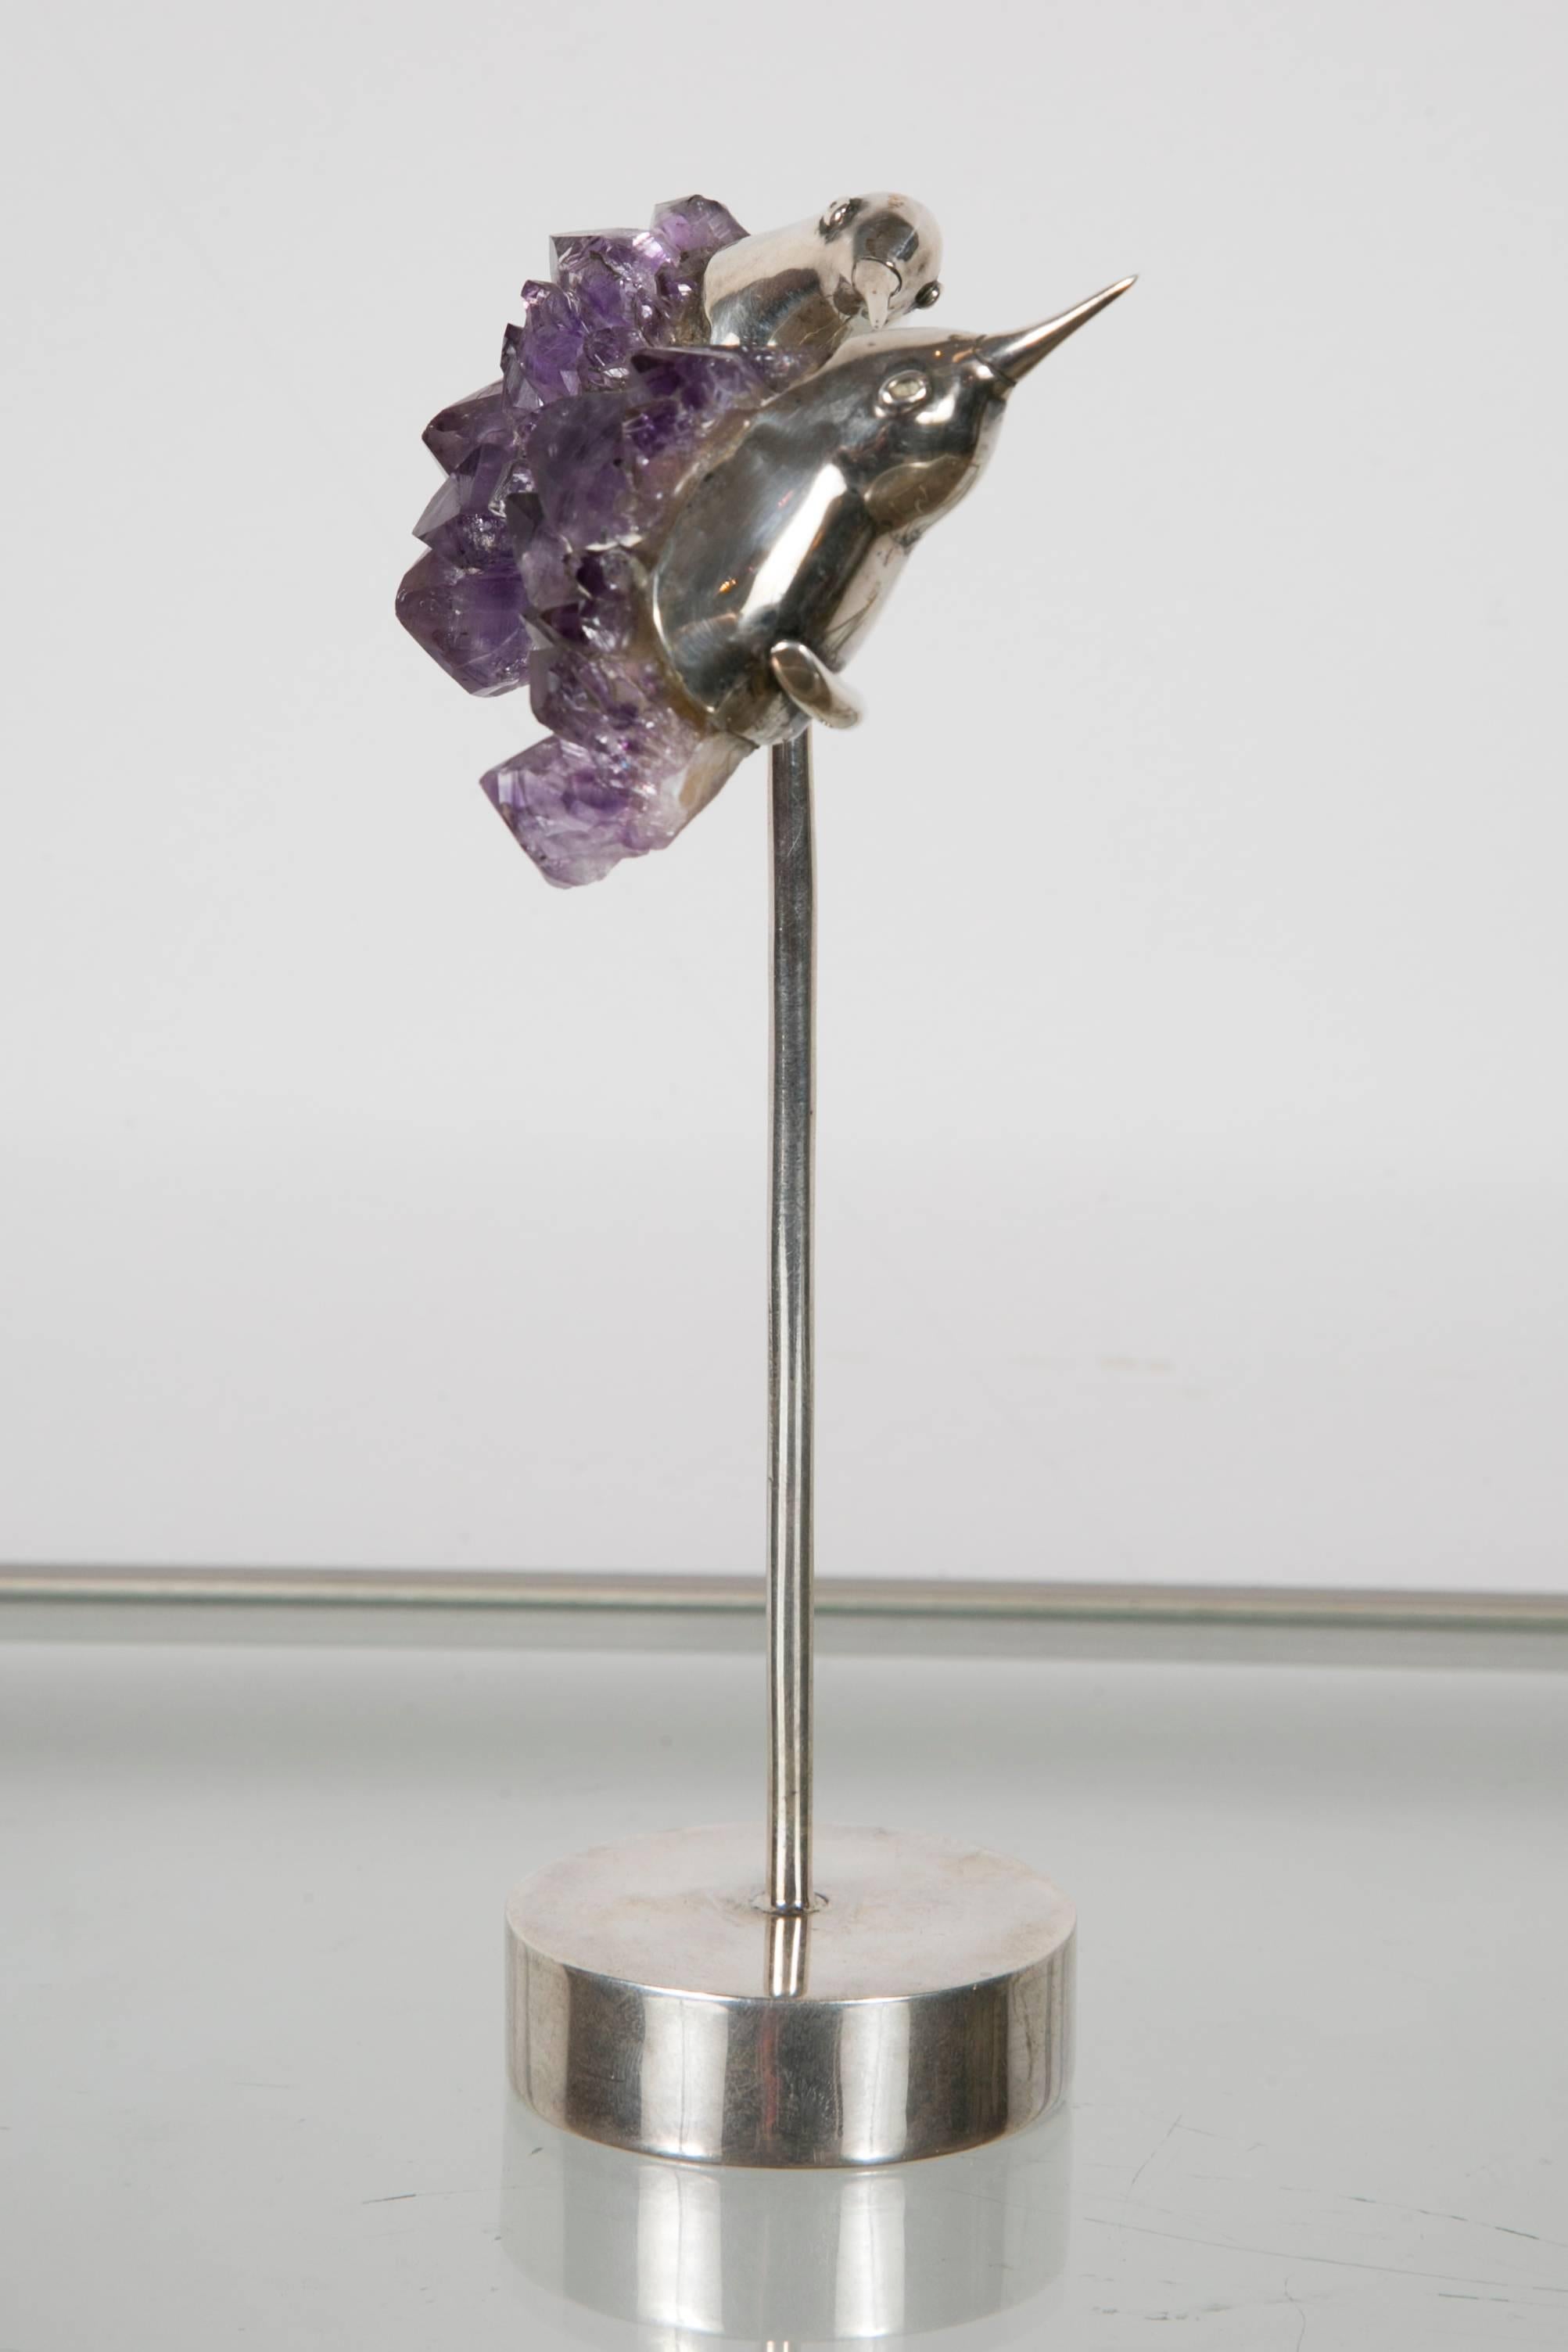 Brazilian Charming Pair of Silver and Amethyst Hummingbird Perched on a Stem